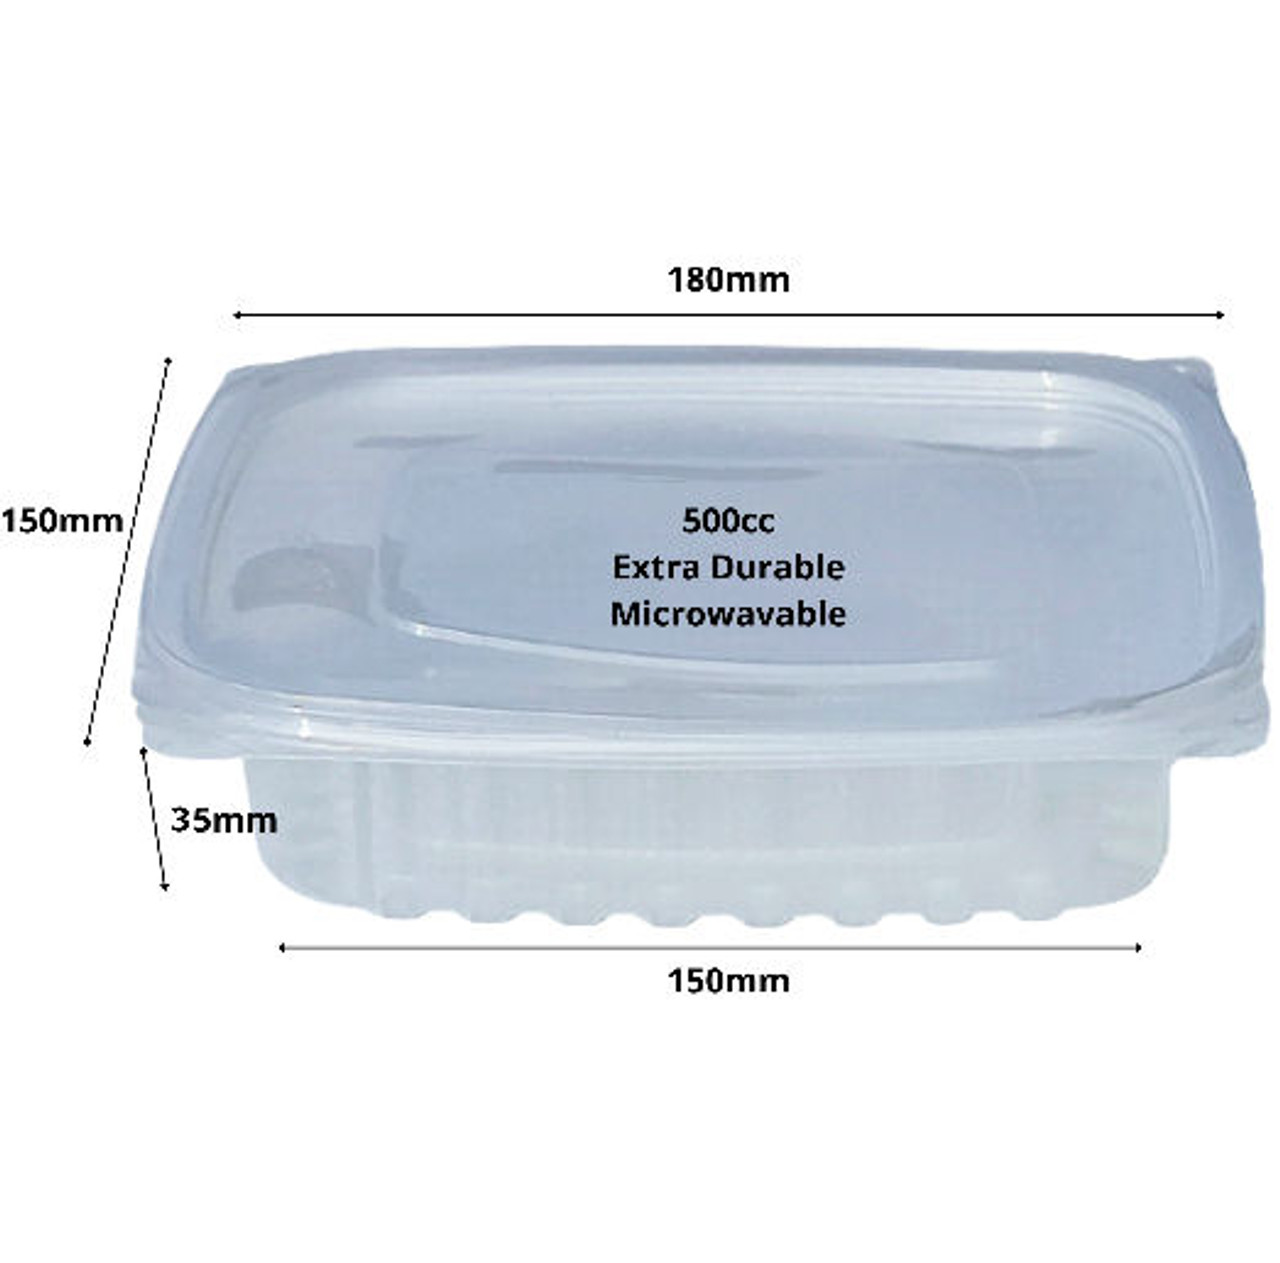 Case x 250 - SP500 High Quality 500cc microwave containers & lids ( see qty options )